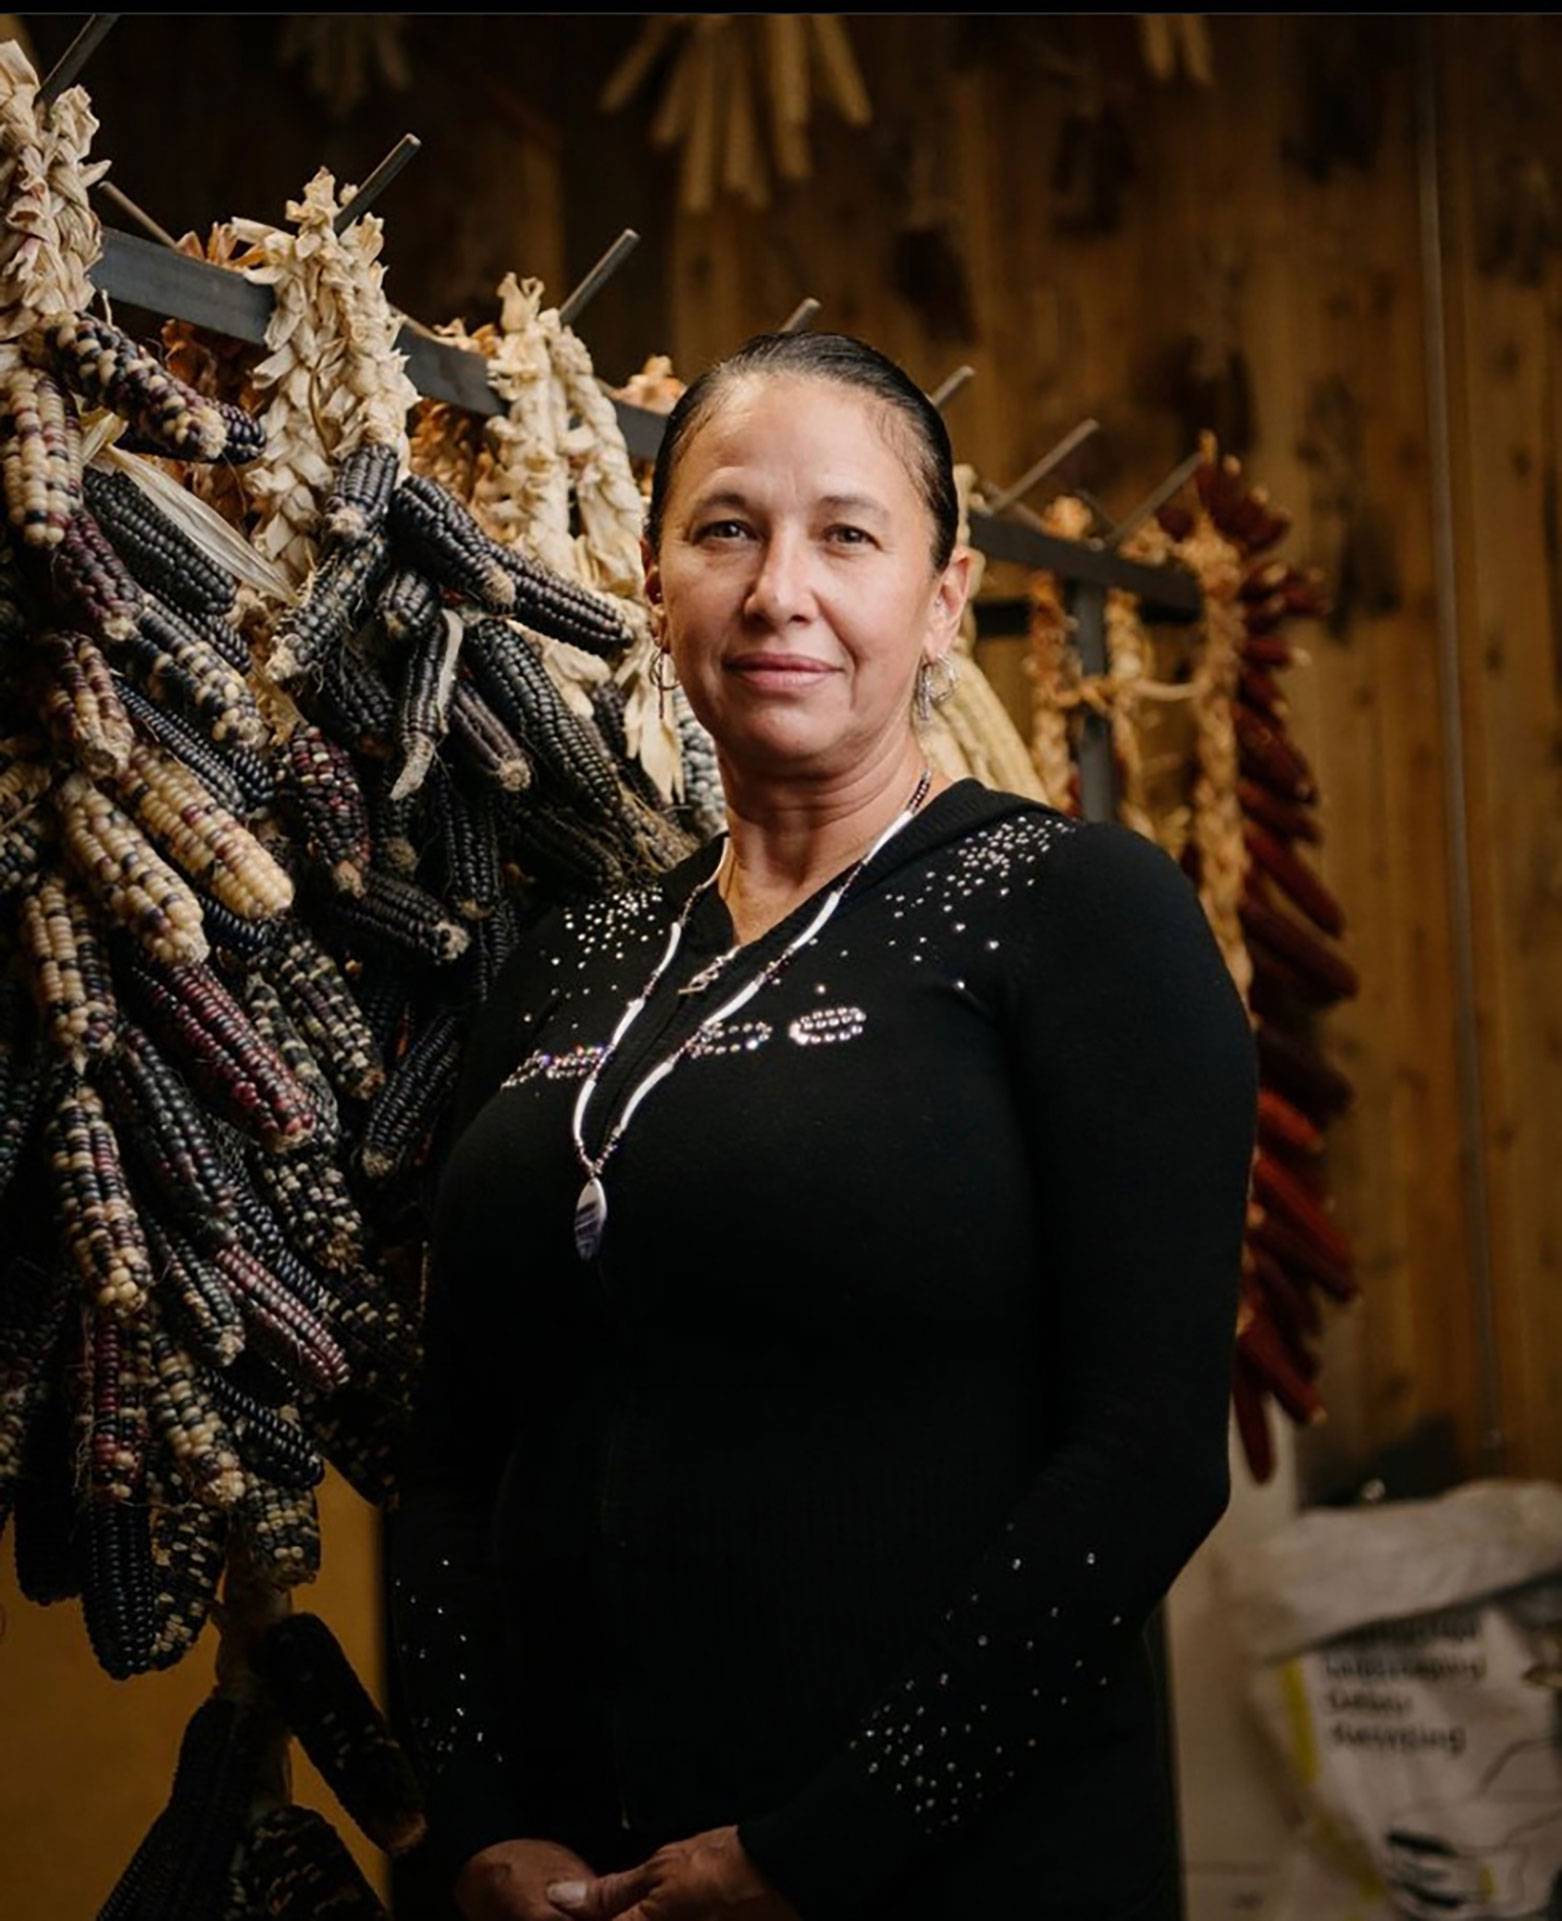 Angela Ferguson poses in front of a rack holding multicolored dried ears of corn strung together